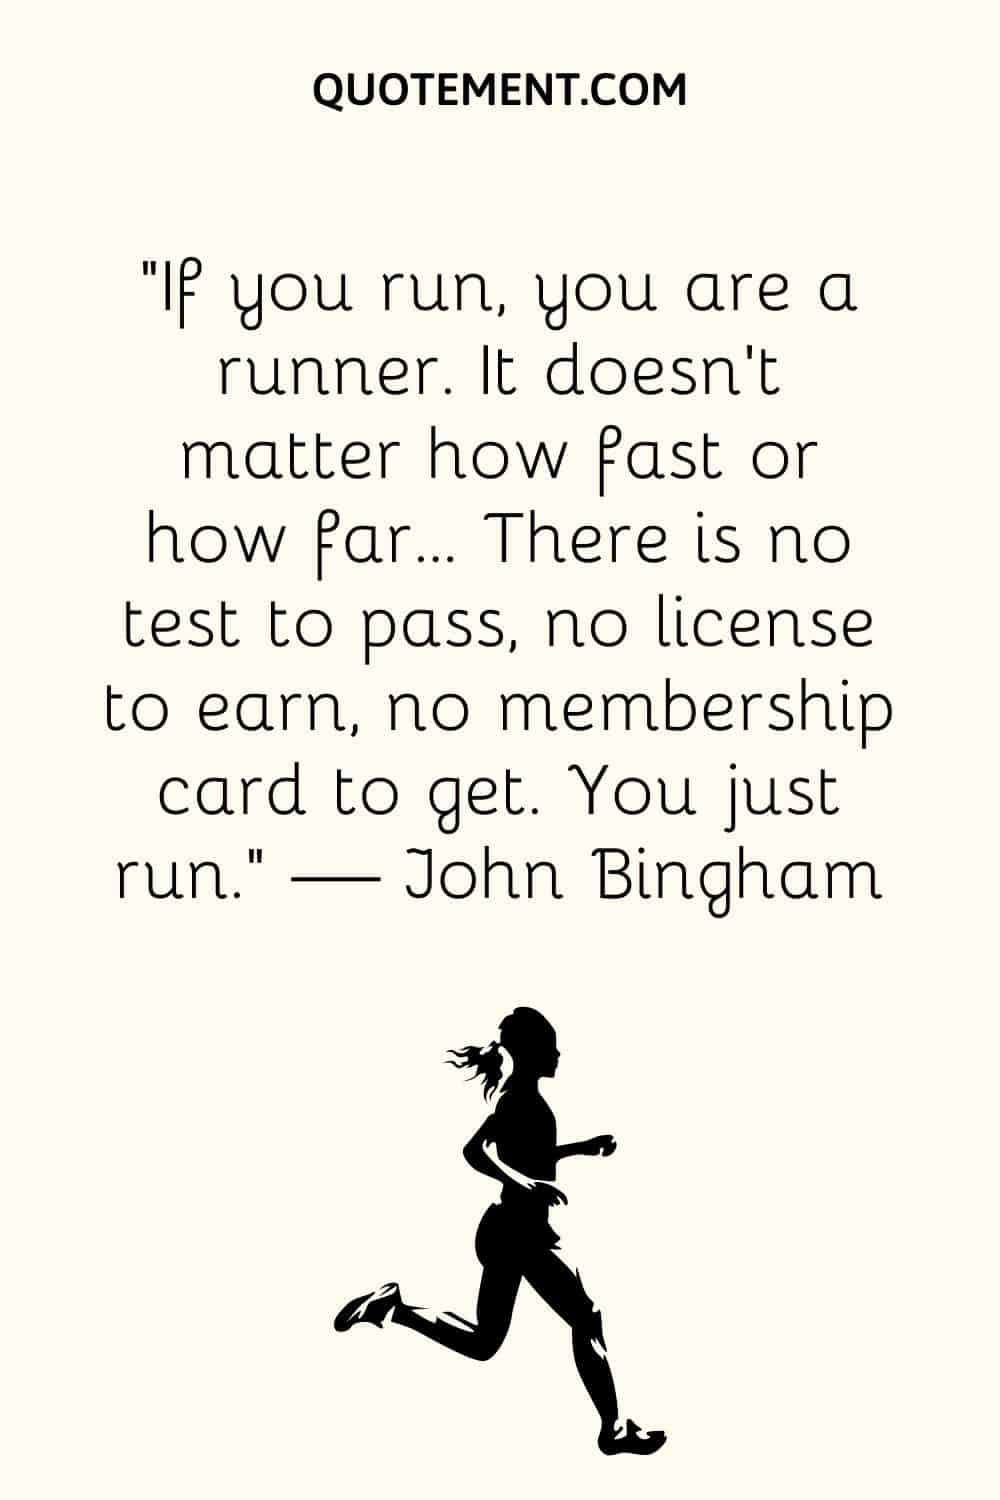 If you run, you are a runner. It doesn’t matter how fast or how far